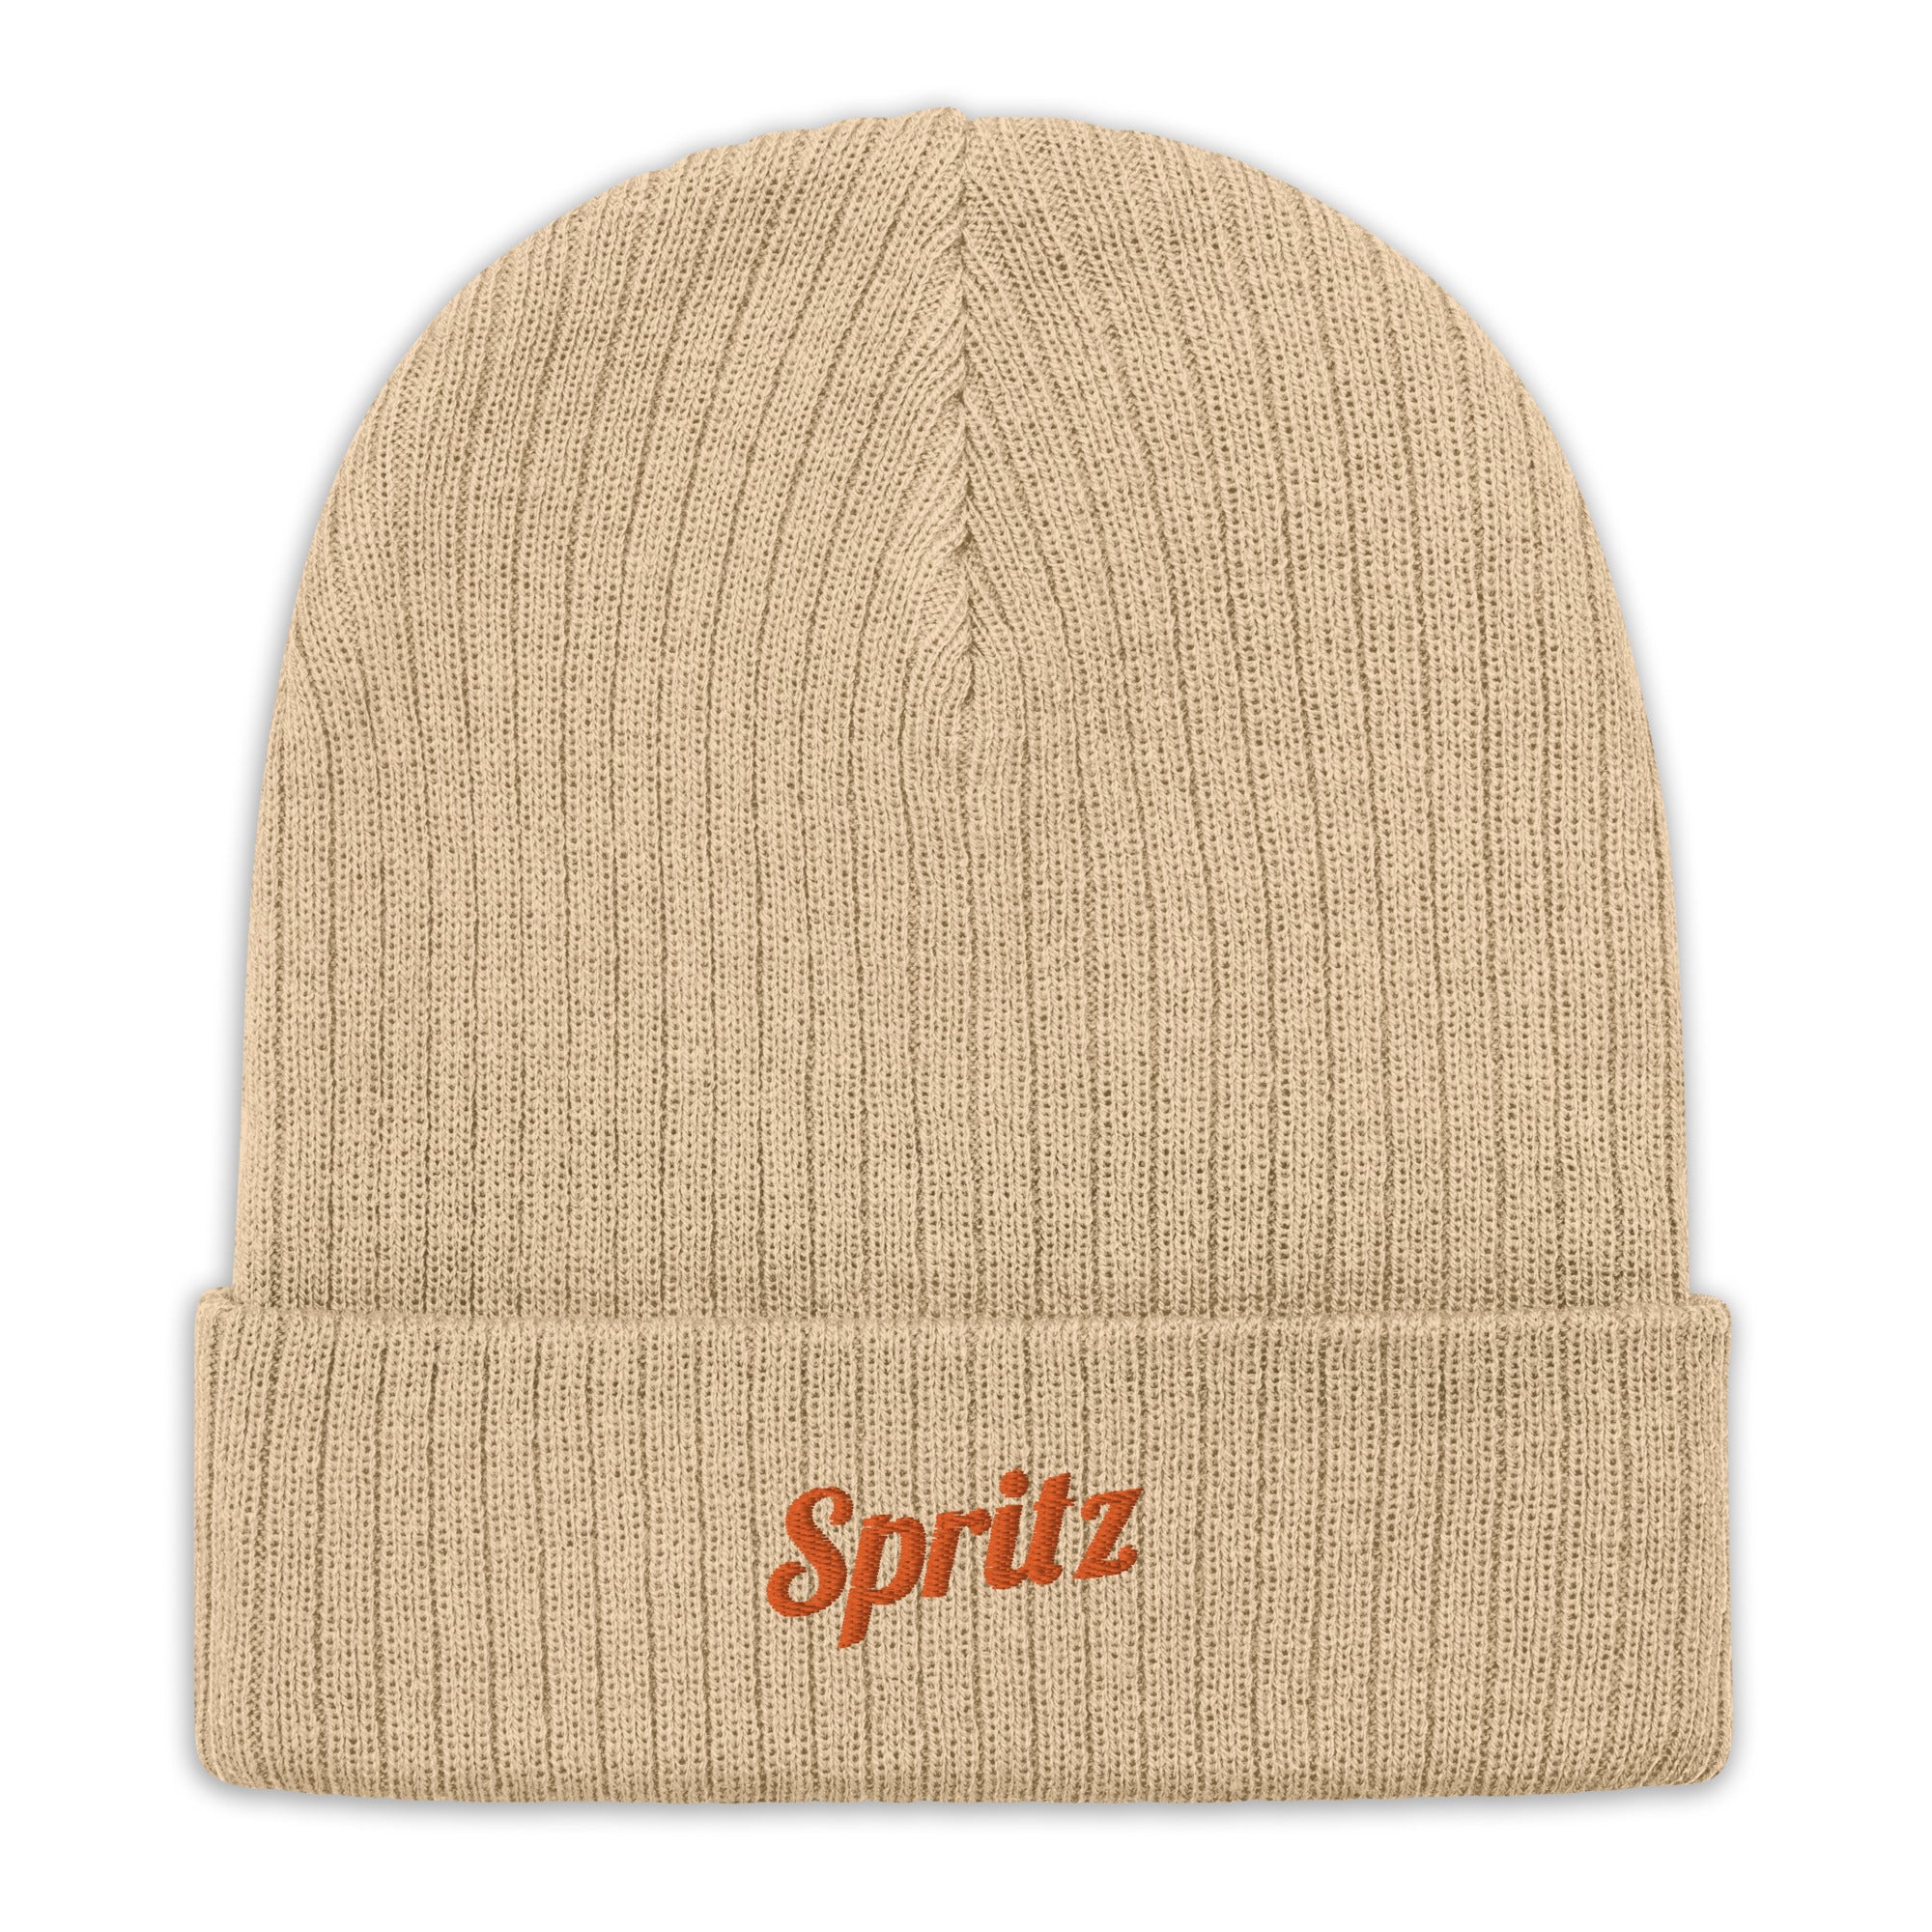 Spritz - Recycled Embroidered Beanie - The Refined Spirit